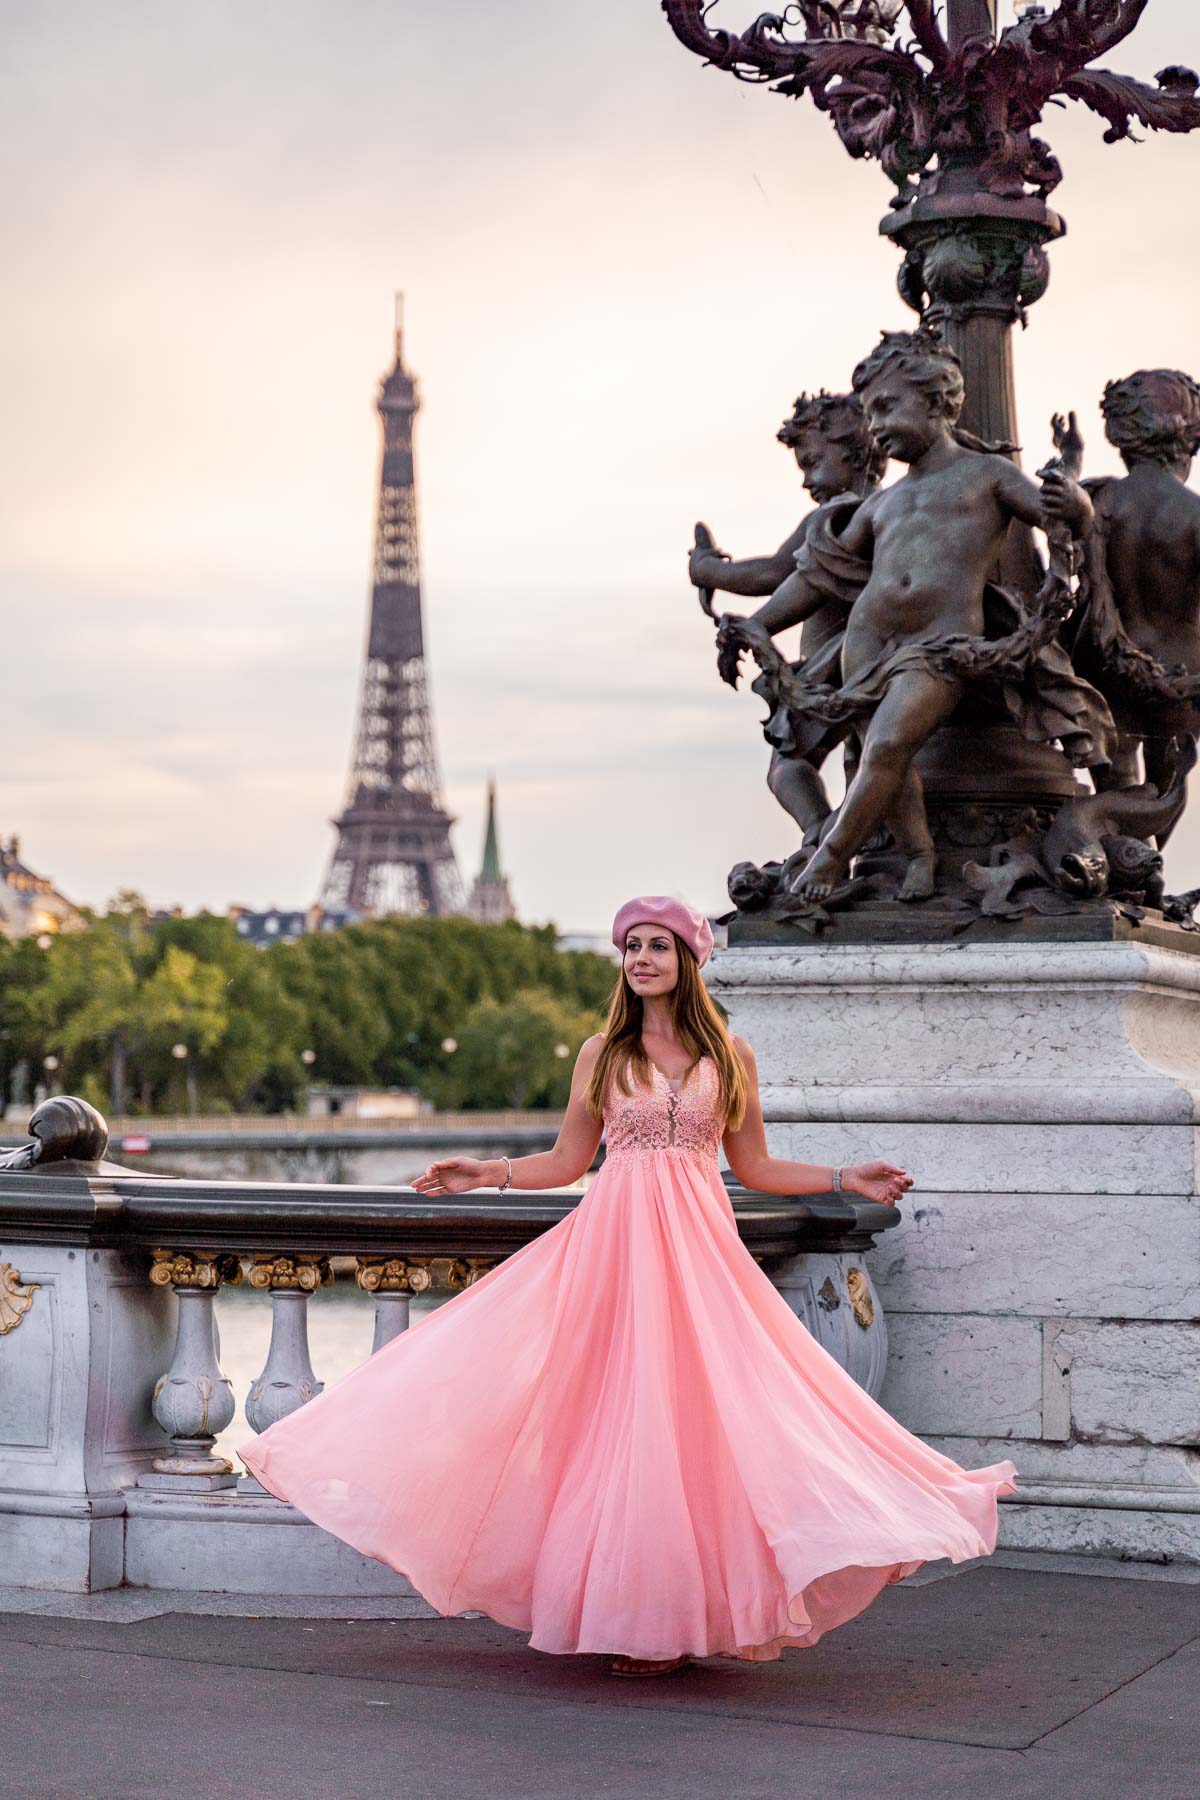 Girl in a pink dress twirling on Pont Alexandre III with the Eiffel Tower in the background